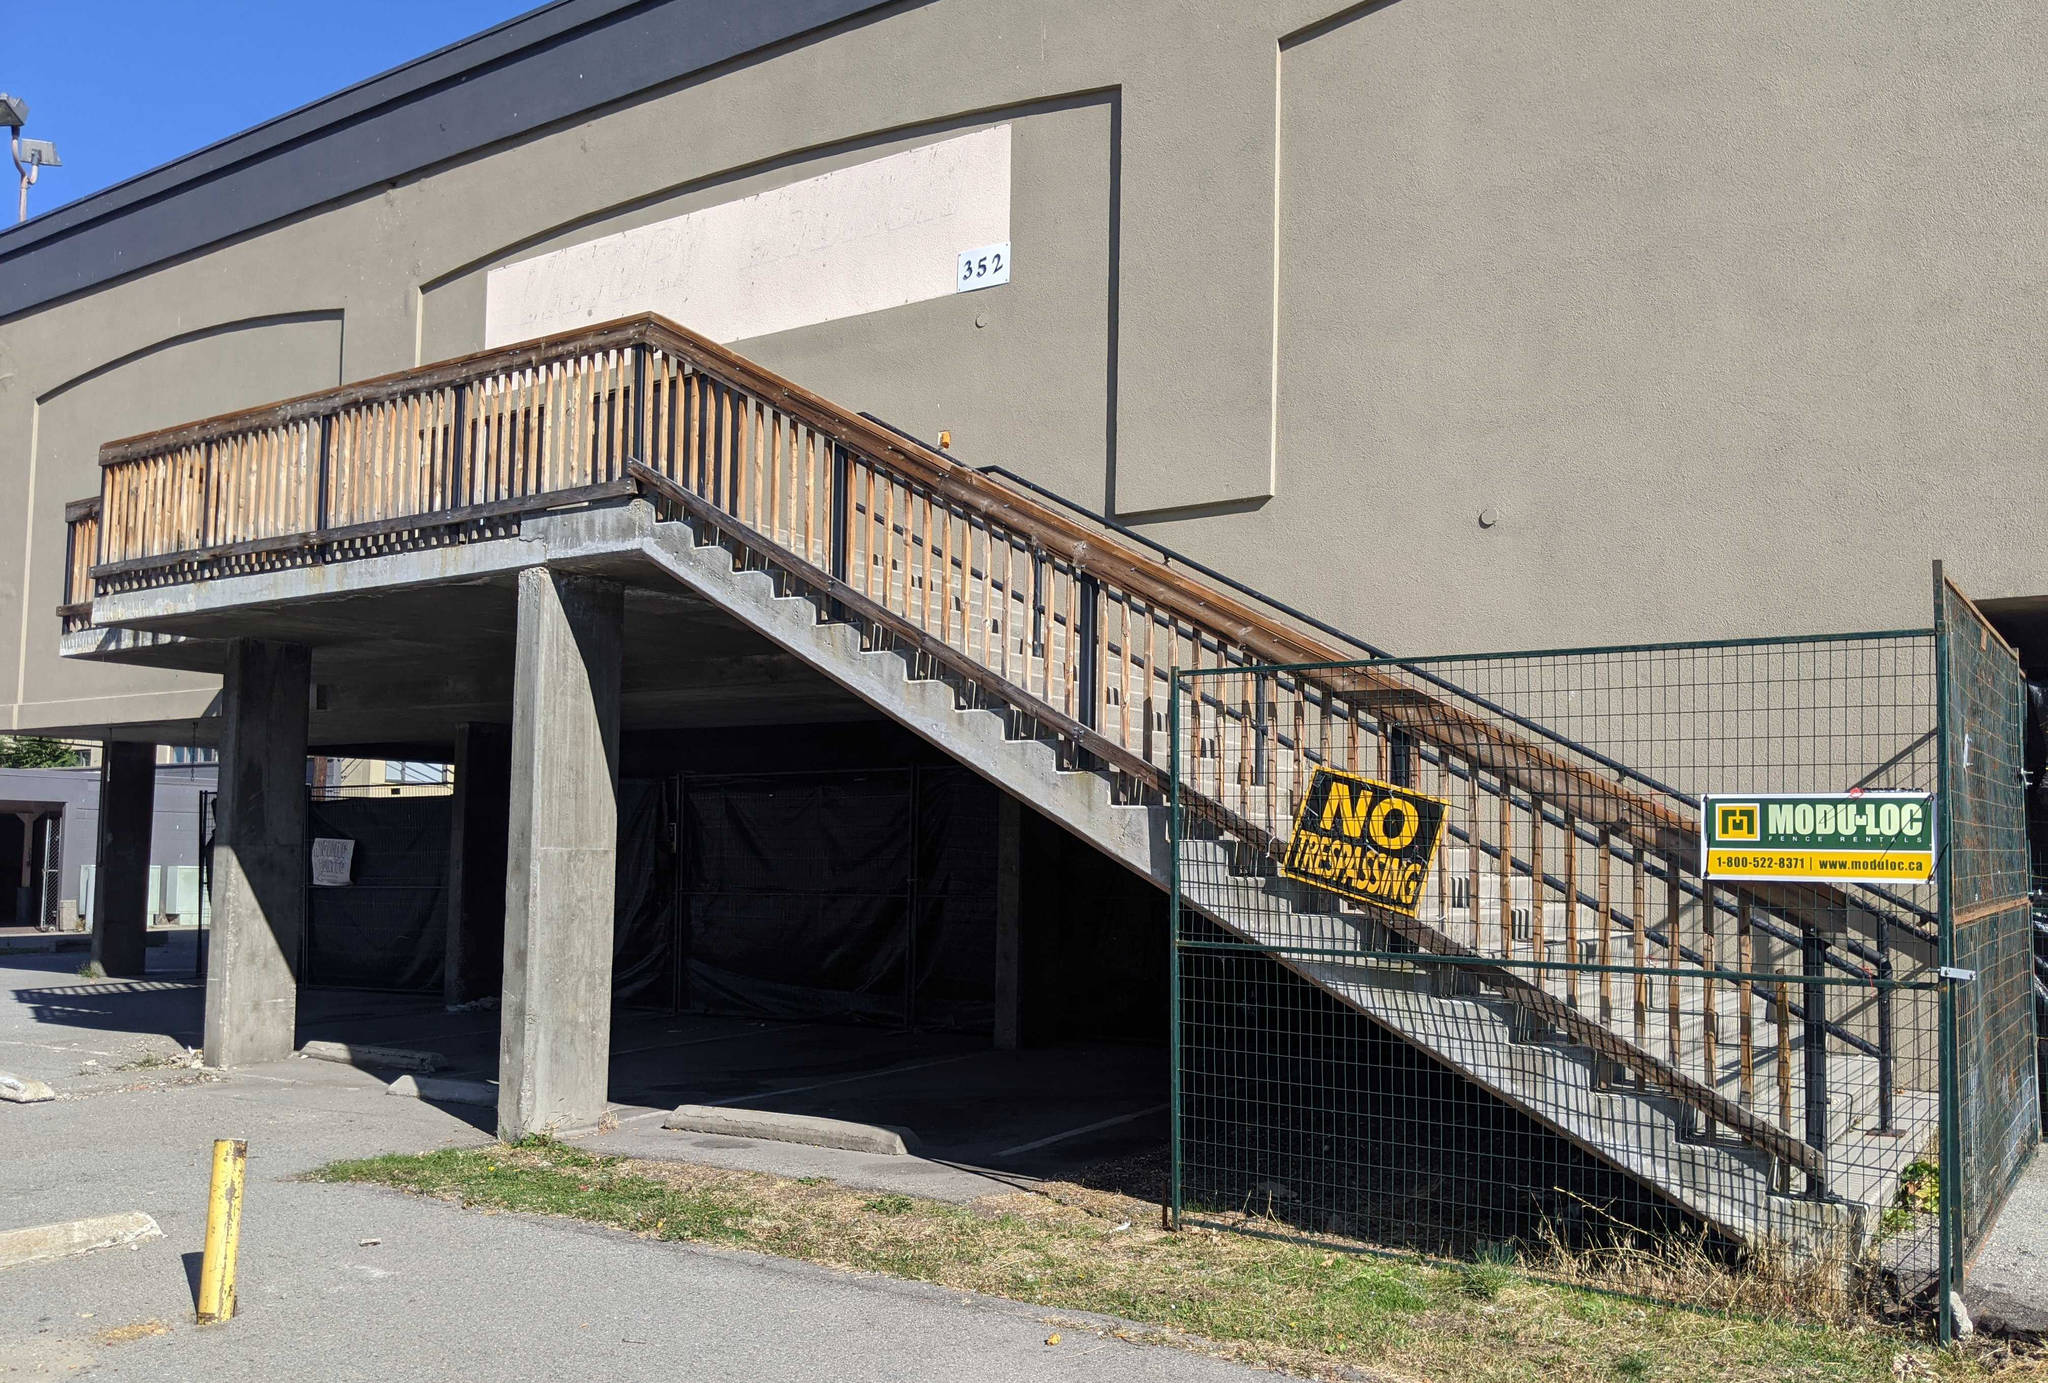 Penticton city council has unanimously shot down an application from BC Housing to keep a shelter for people experiencing homelessness open for an additional year. (Jesse Day - Western News)